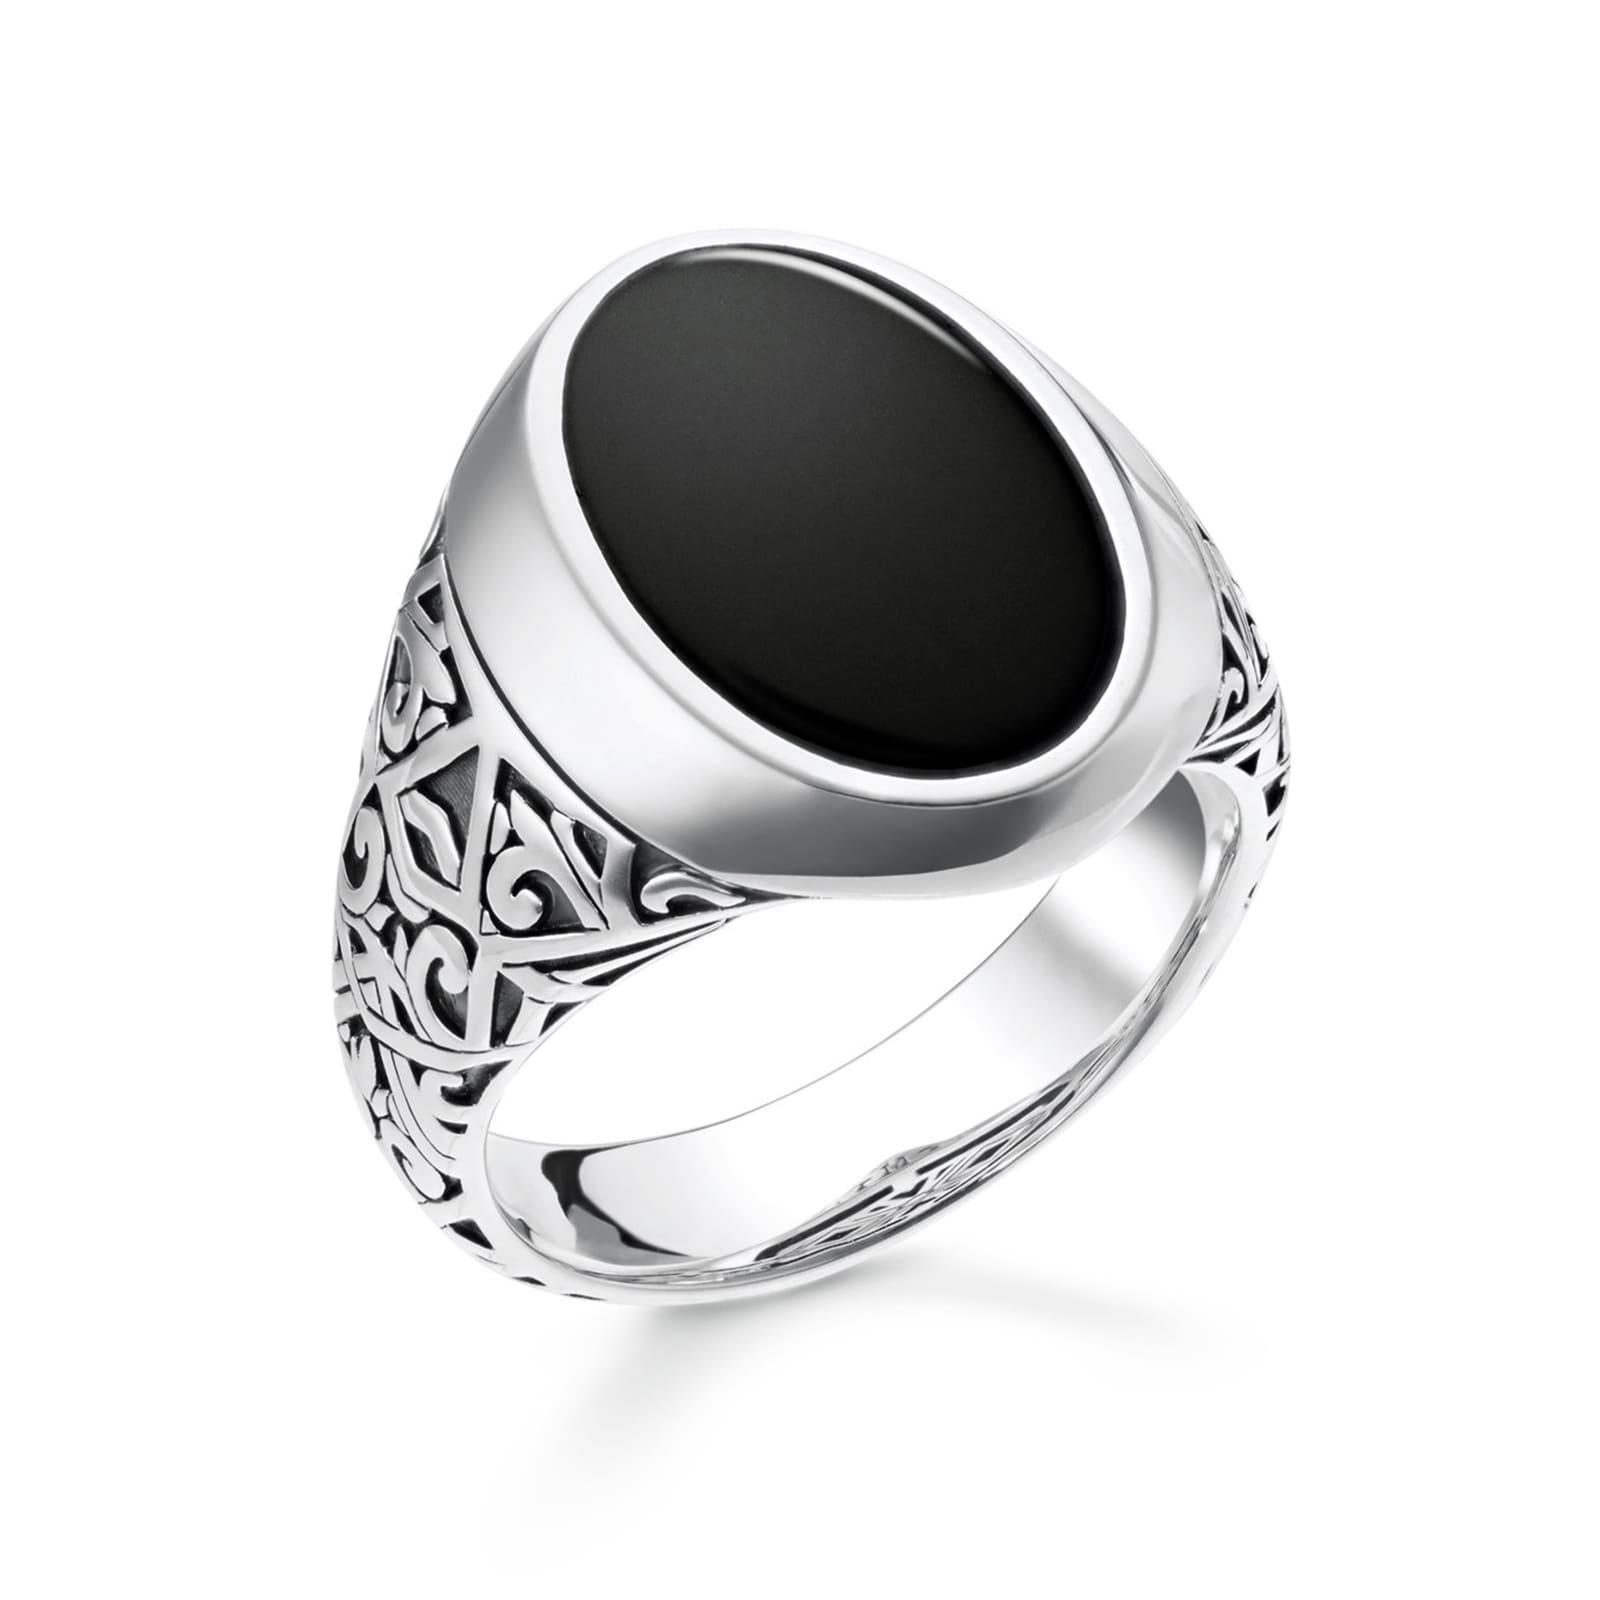 Buy Mens Black Onyx 925 Sterling Silver Ring UK Size Z 1 US Size 13  protection, Power & Good Fortune Online in India - Etsy